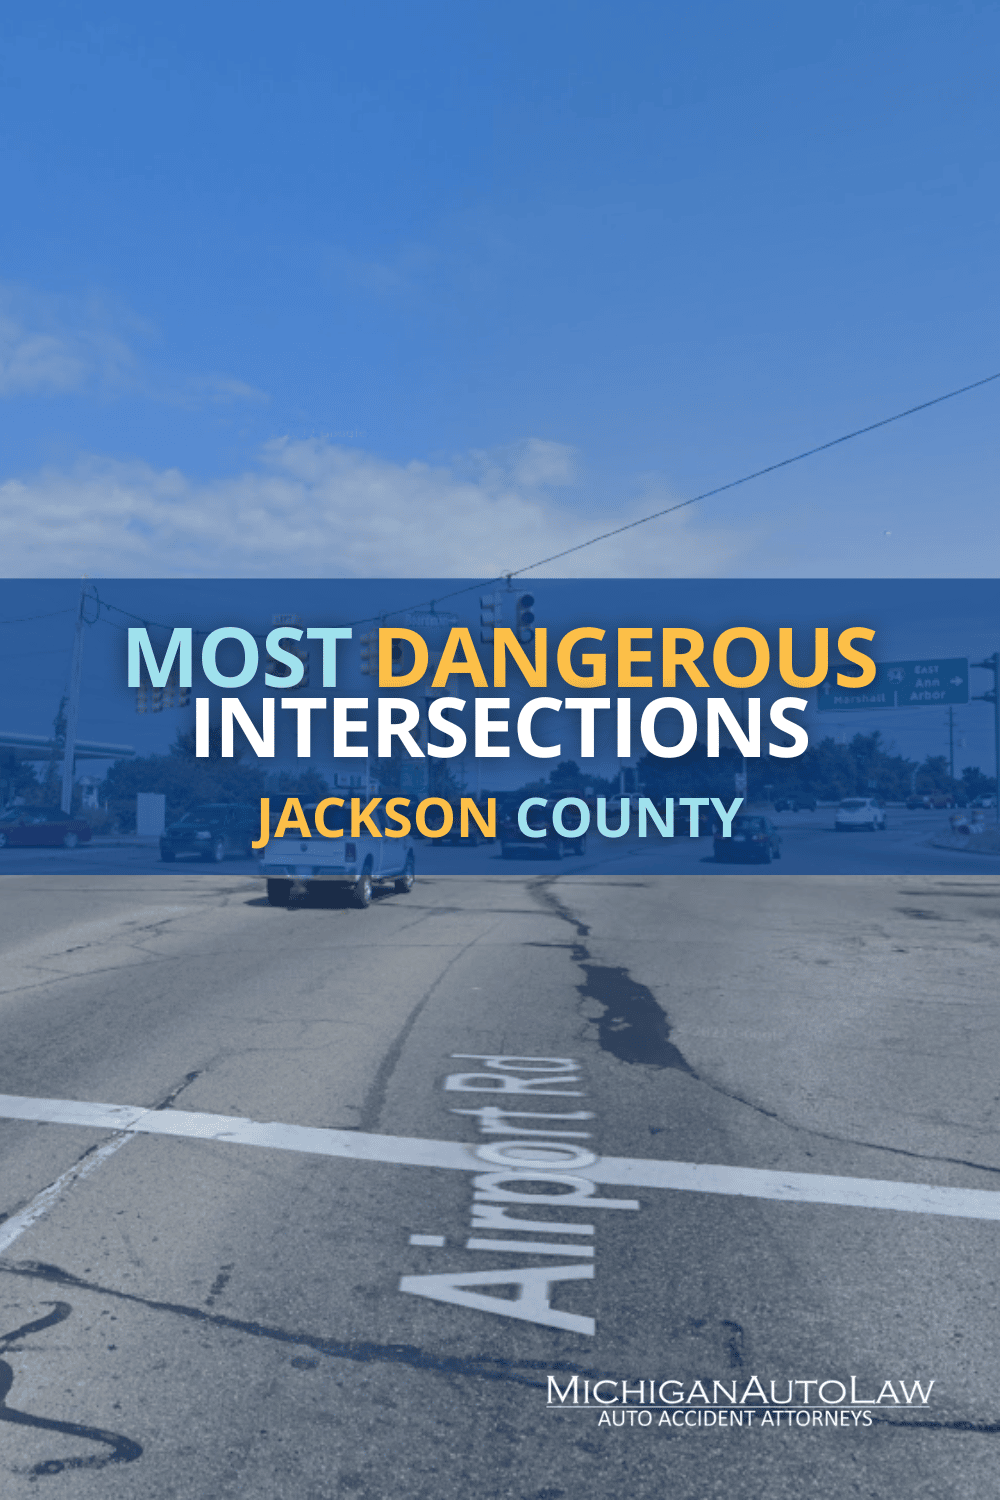 Jackson County’s Most Dangerous Intersections in 2021